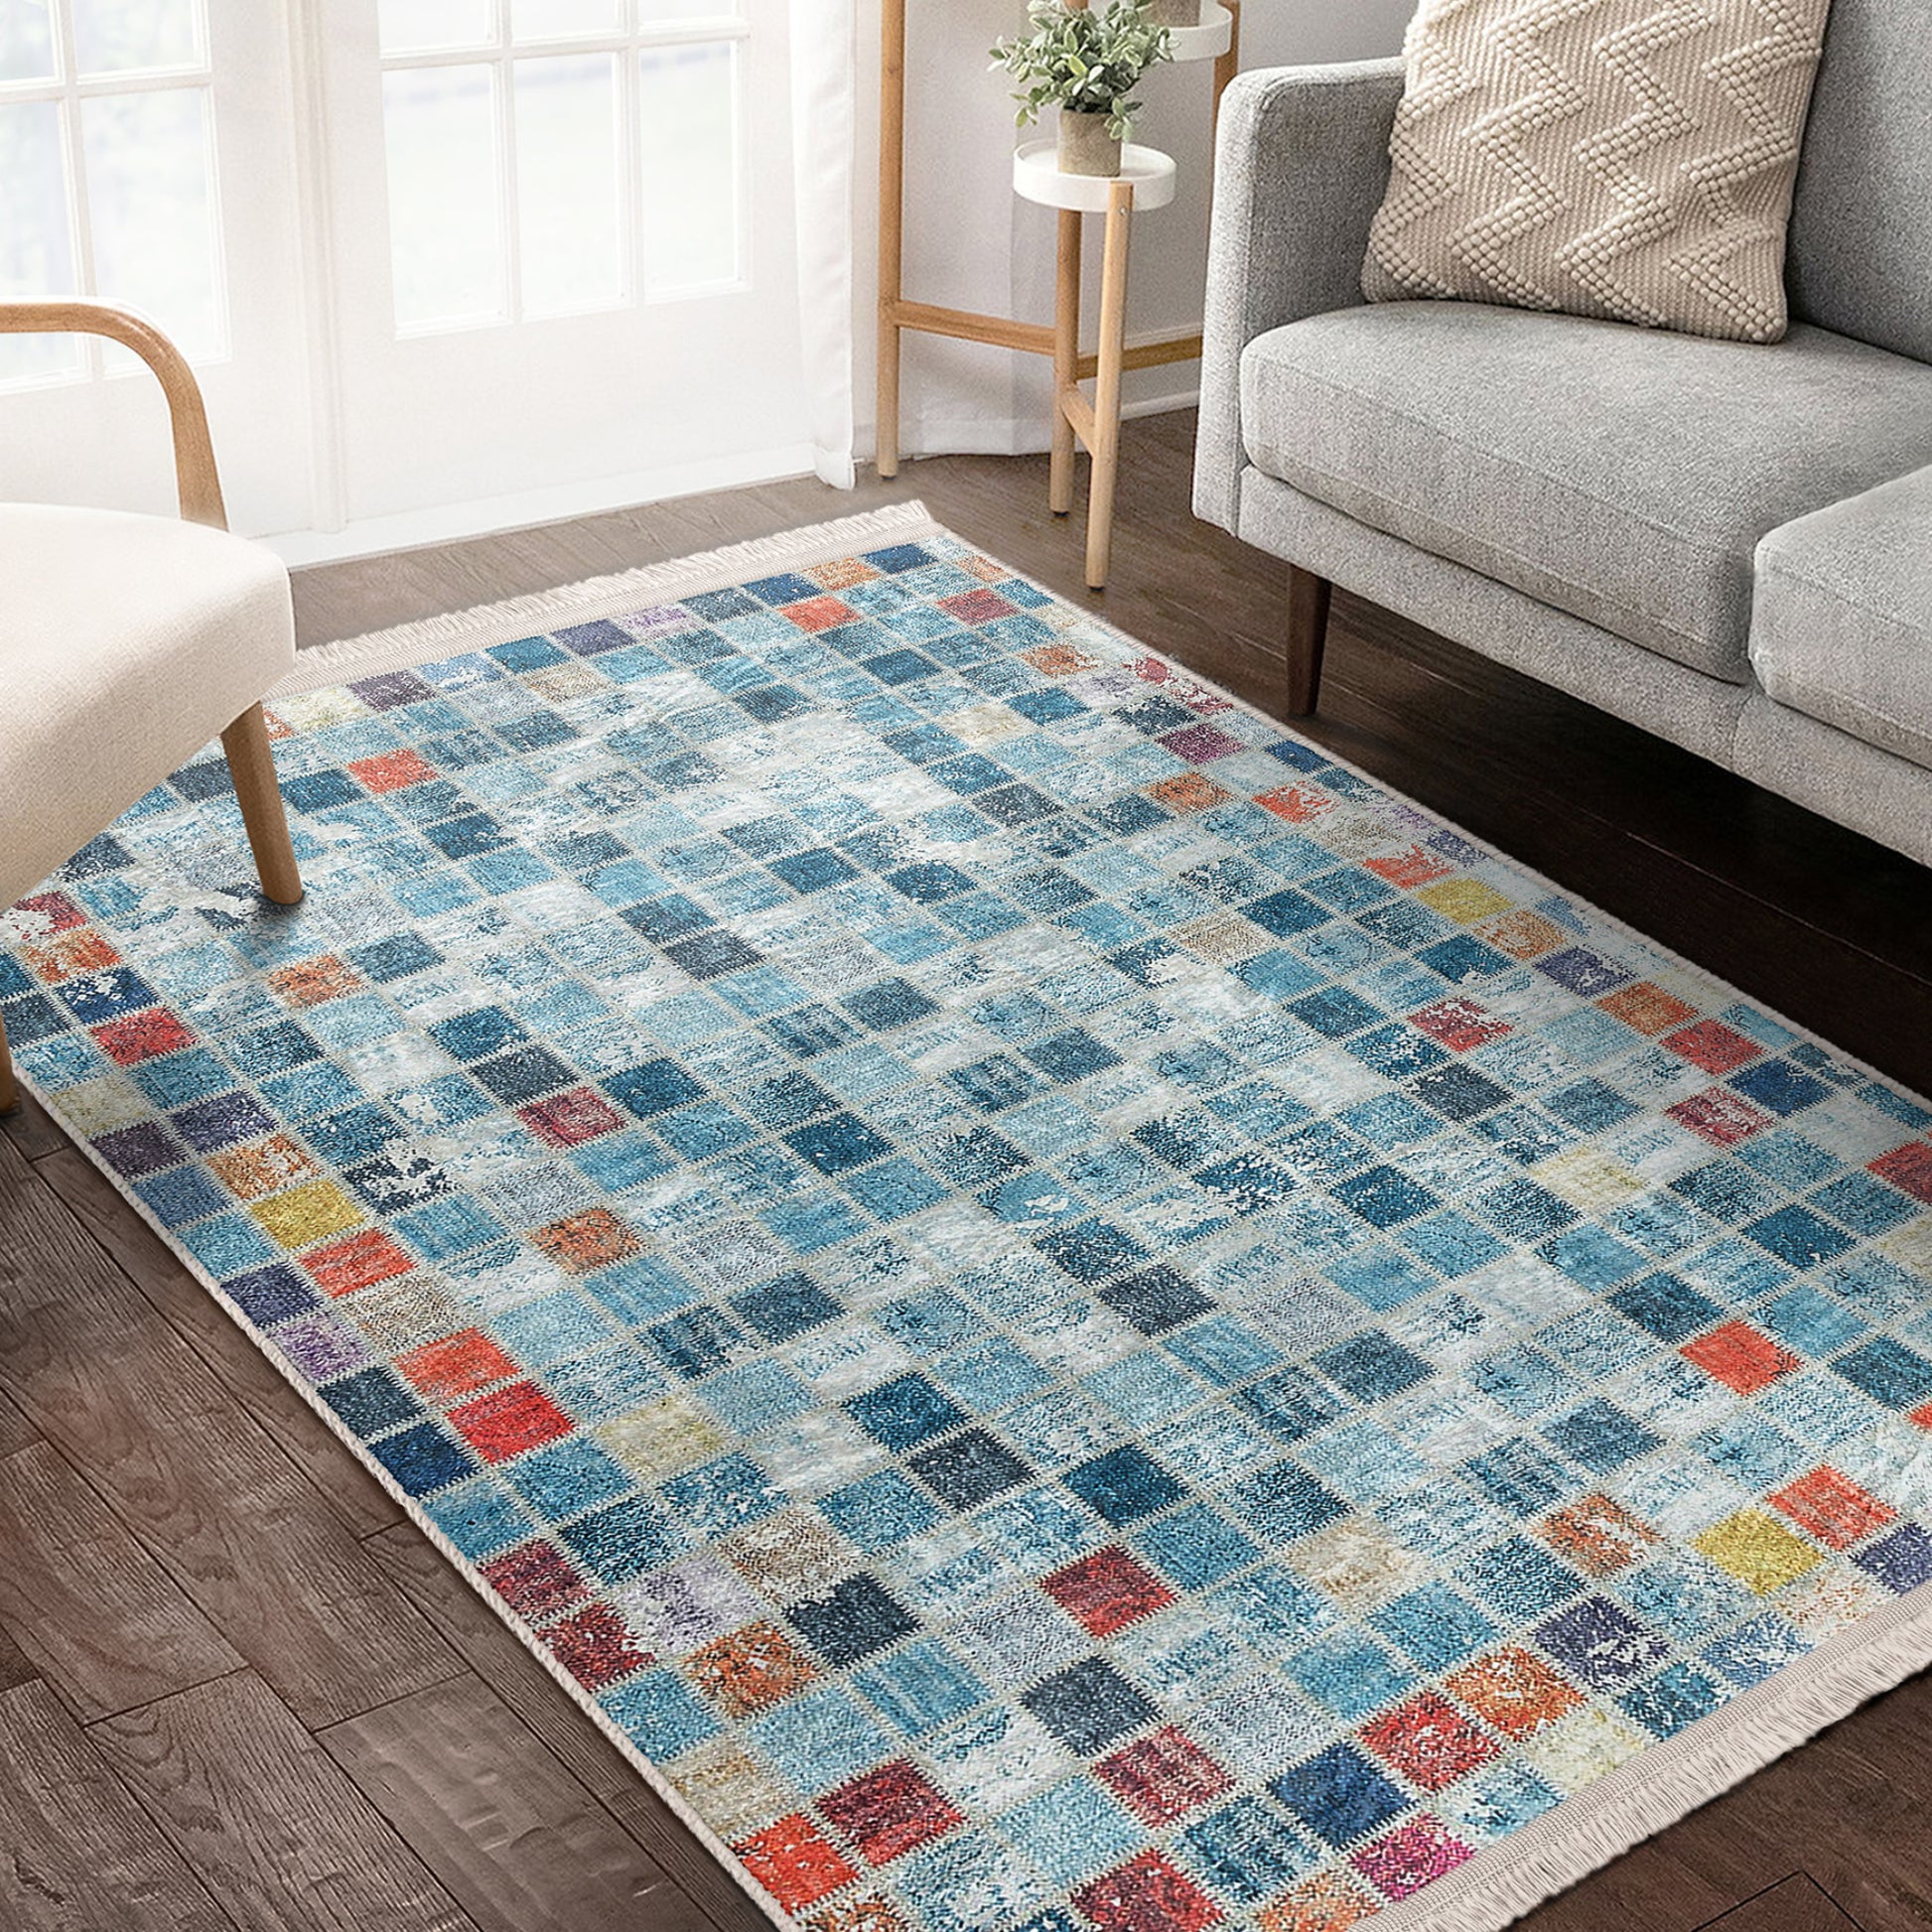 Vintage-Inspired Decorative Rug with Country Charm